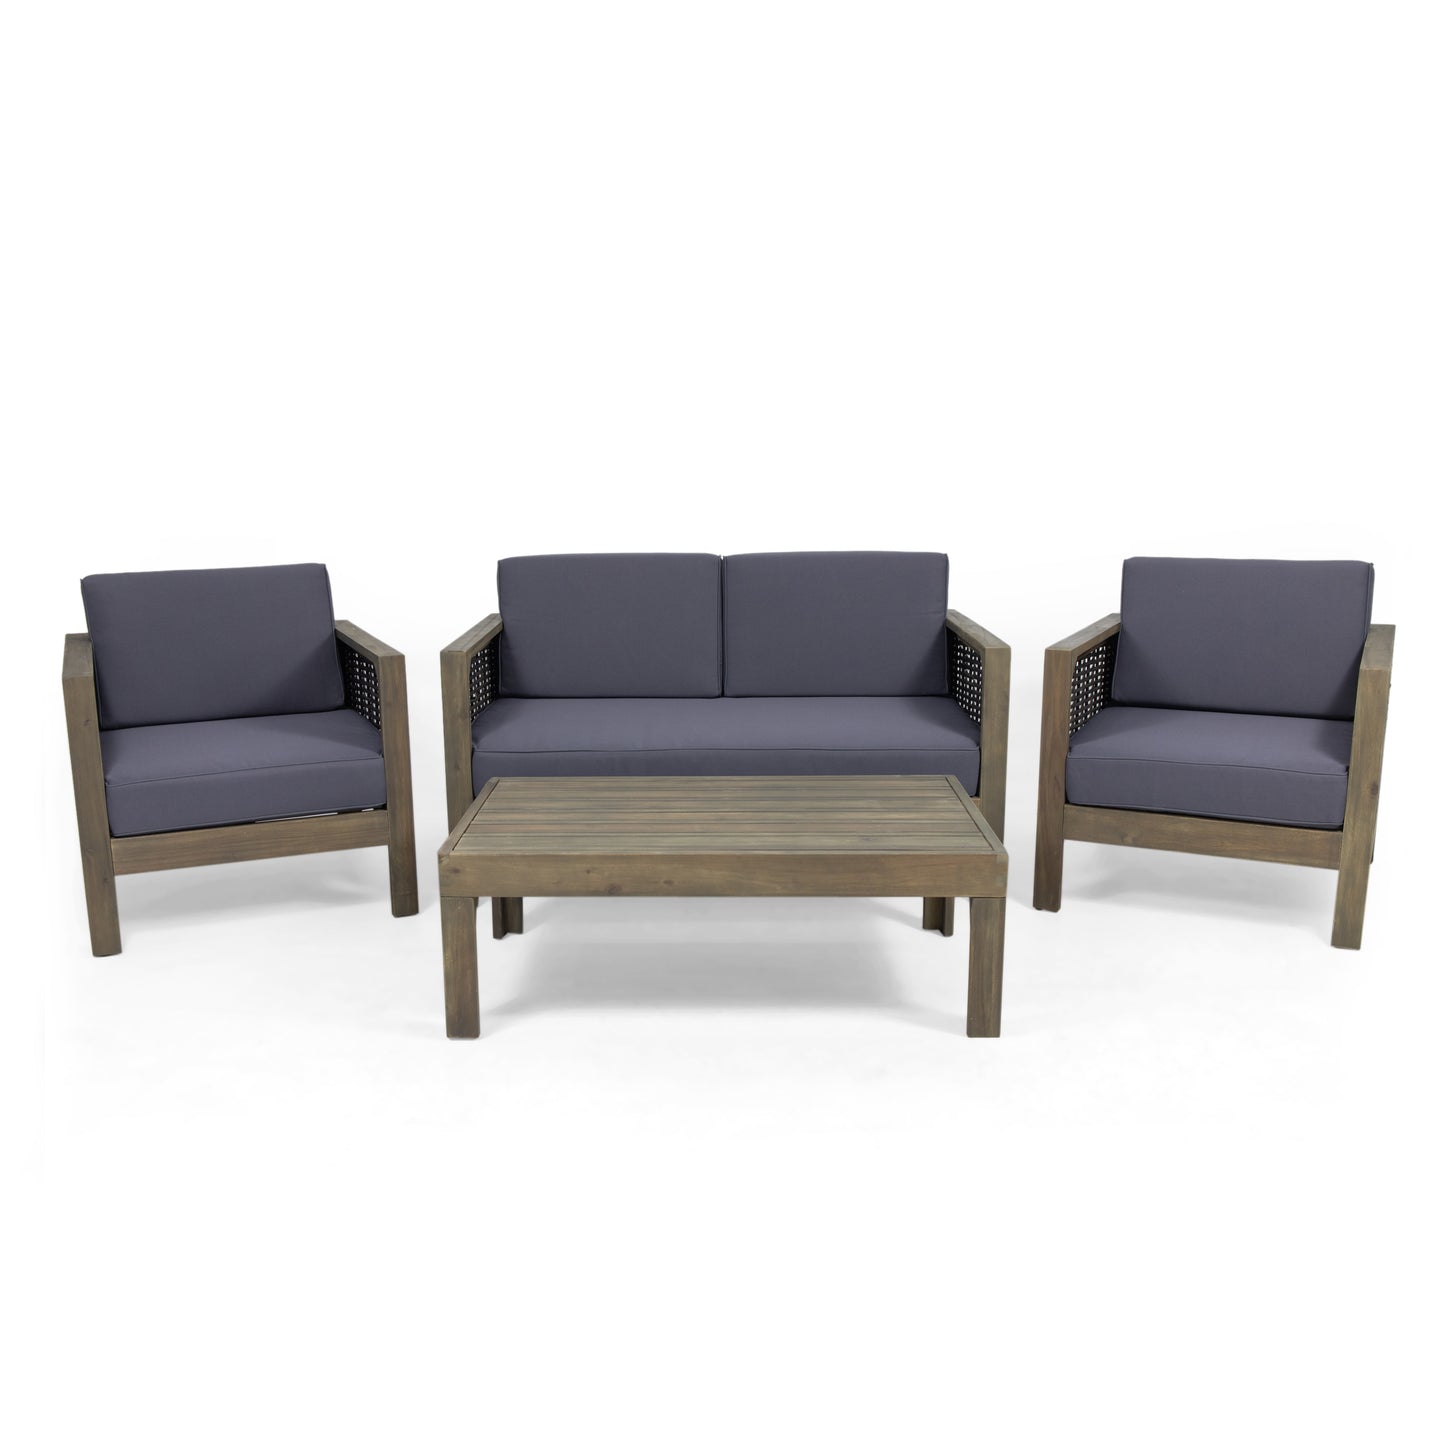 Mayes Outdoor 4 Seater Acacia Wood Chat Set with Wicker Accents